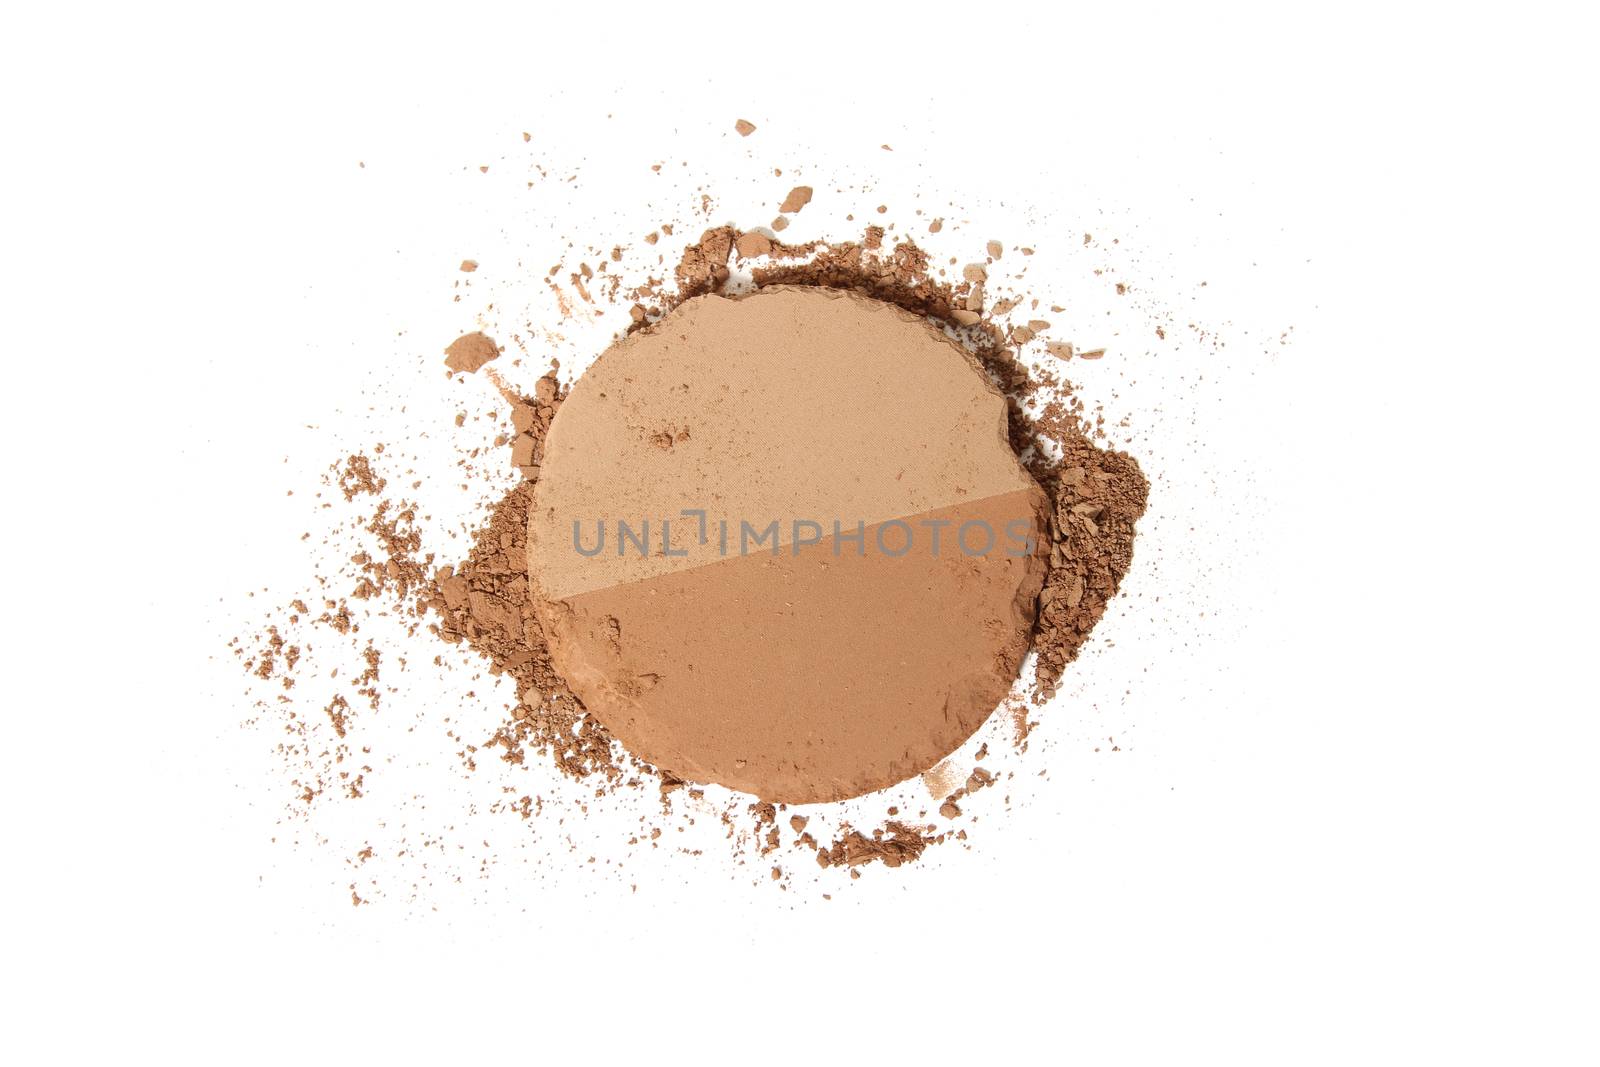 Bronzer or Contour Powder With Brush on White Background